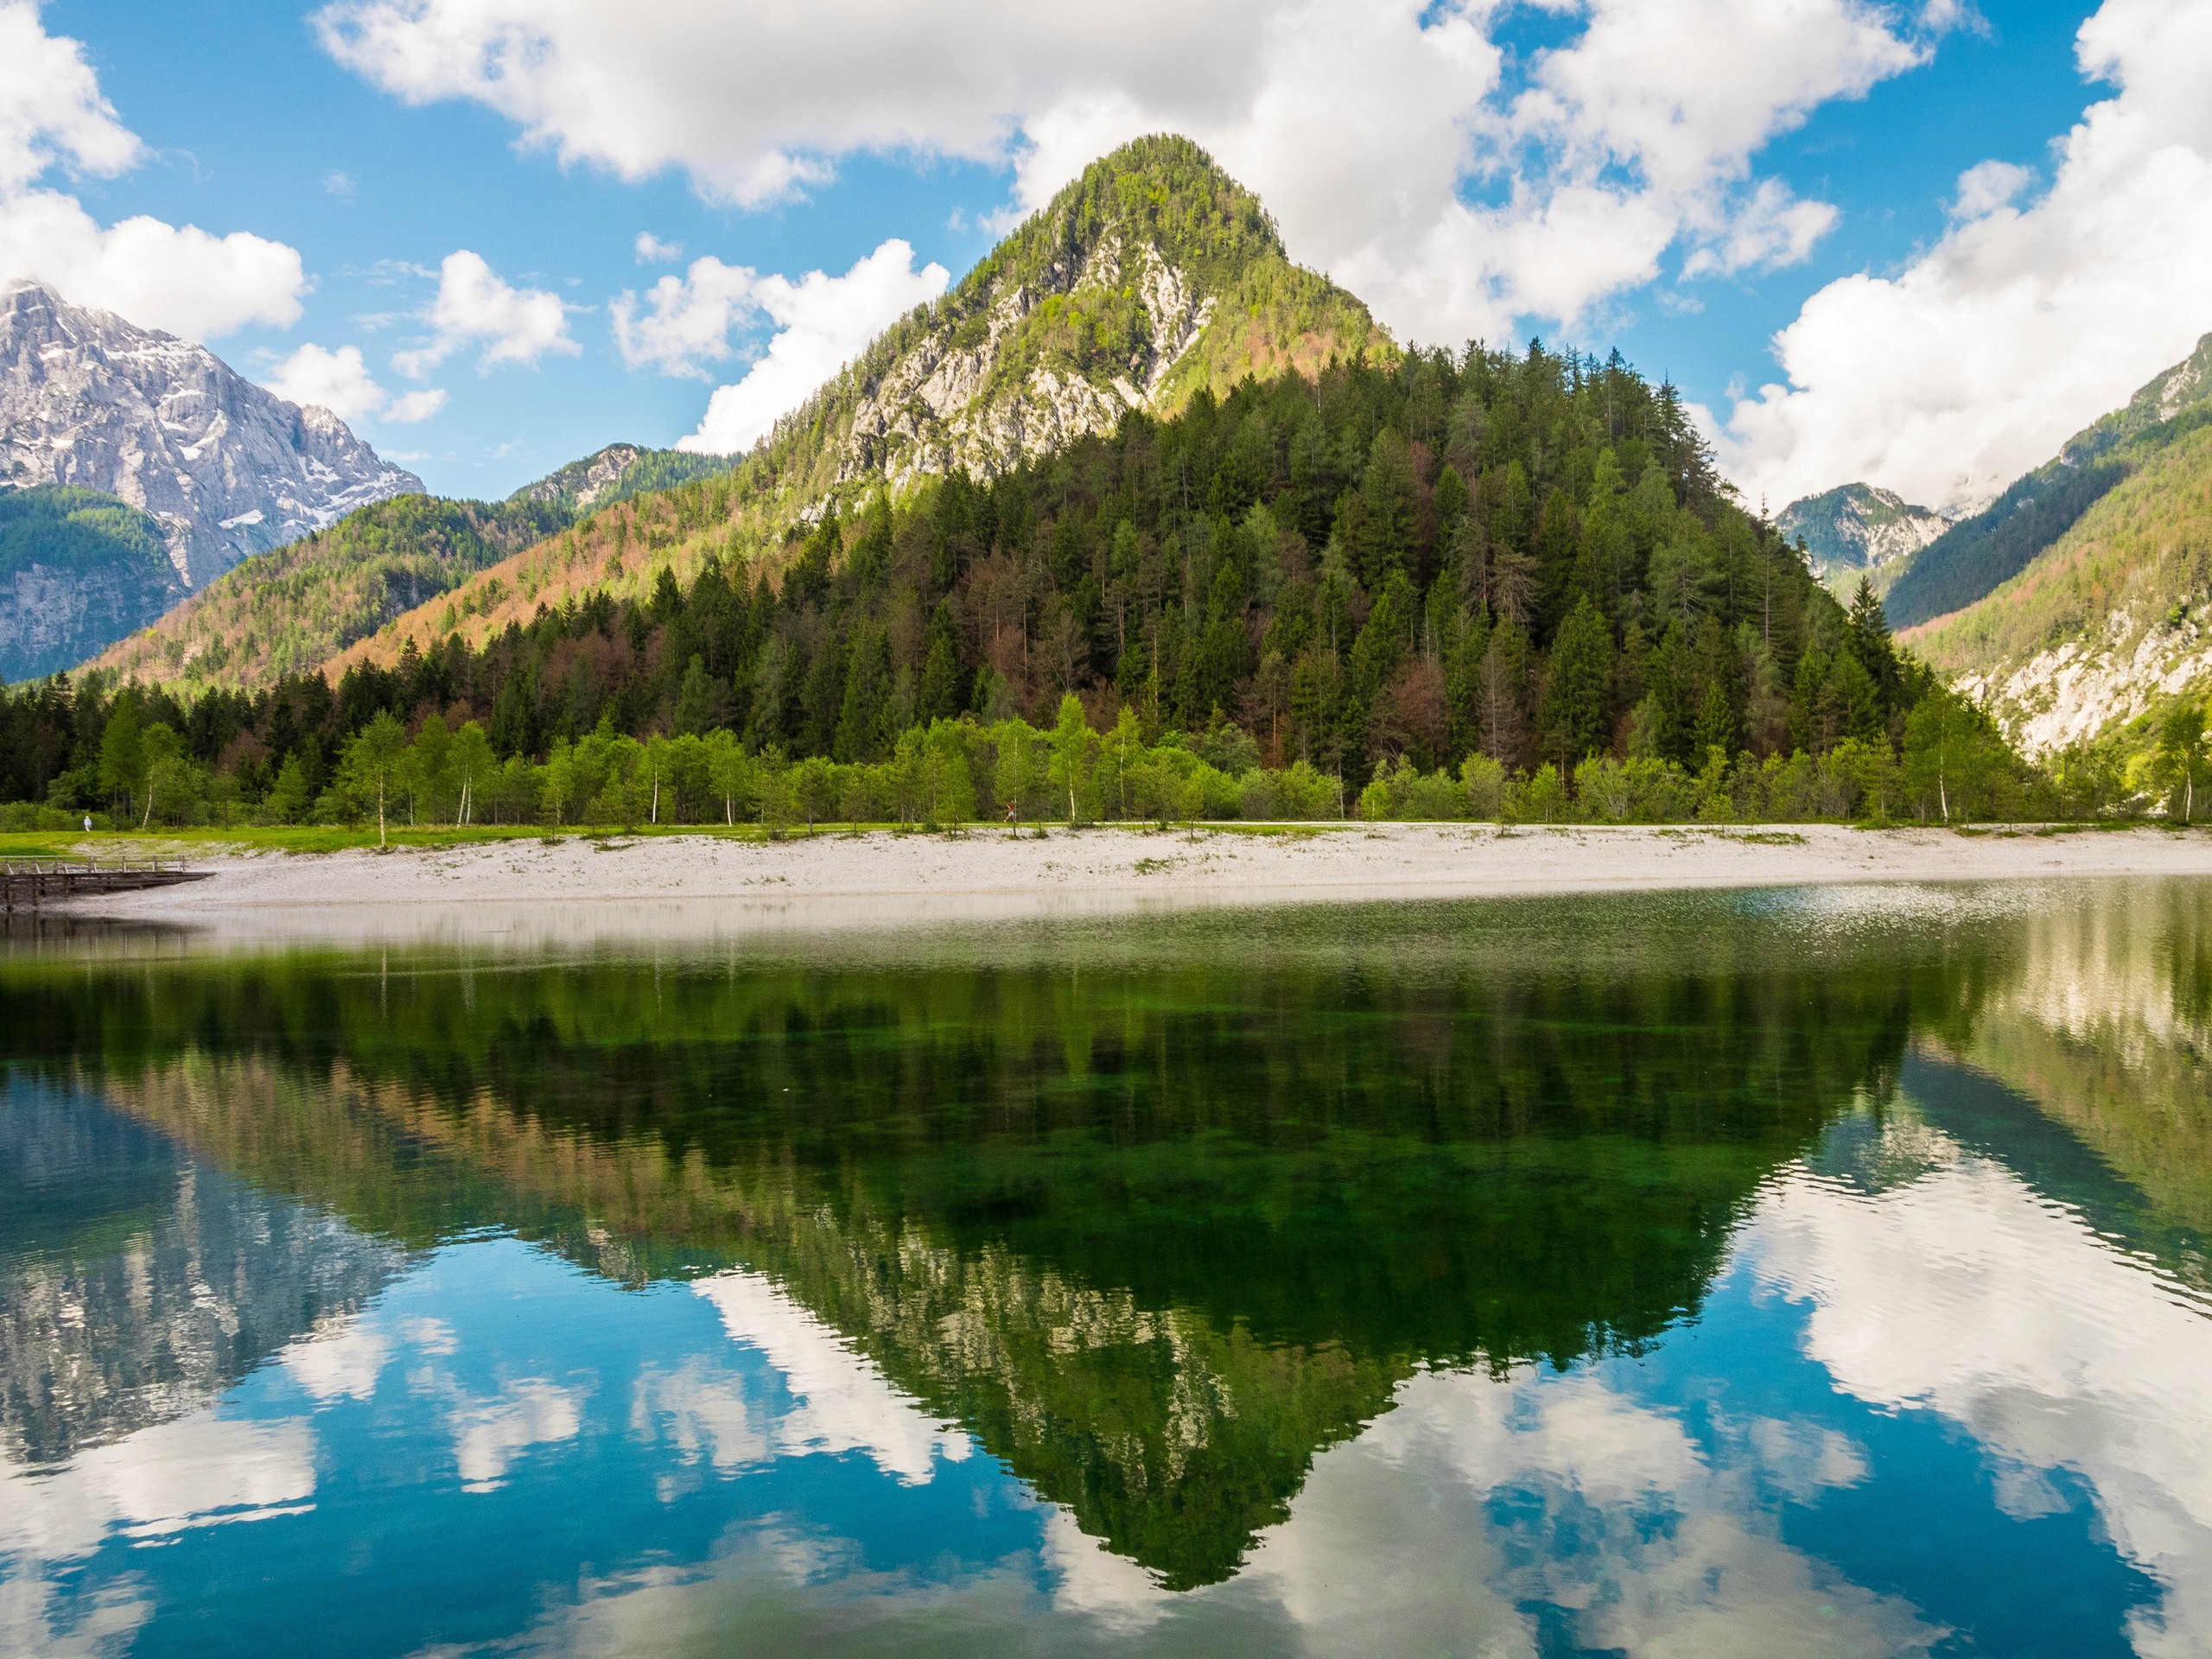 Beautiful mountain reflections in the water in Slovenia